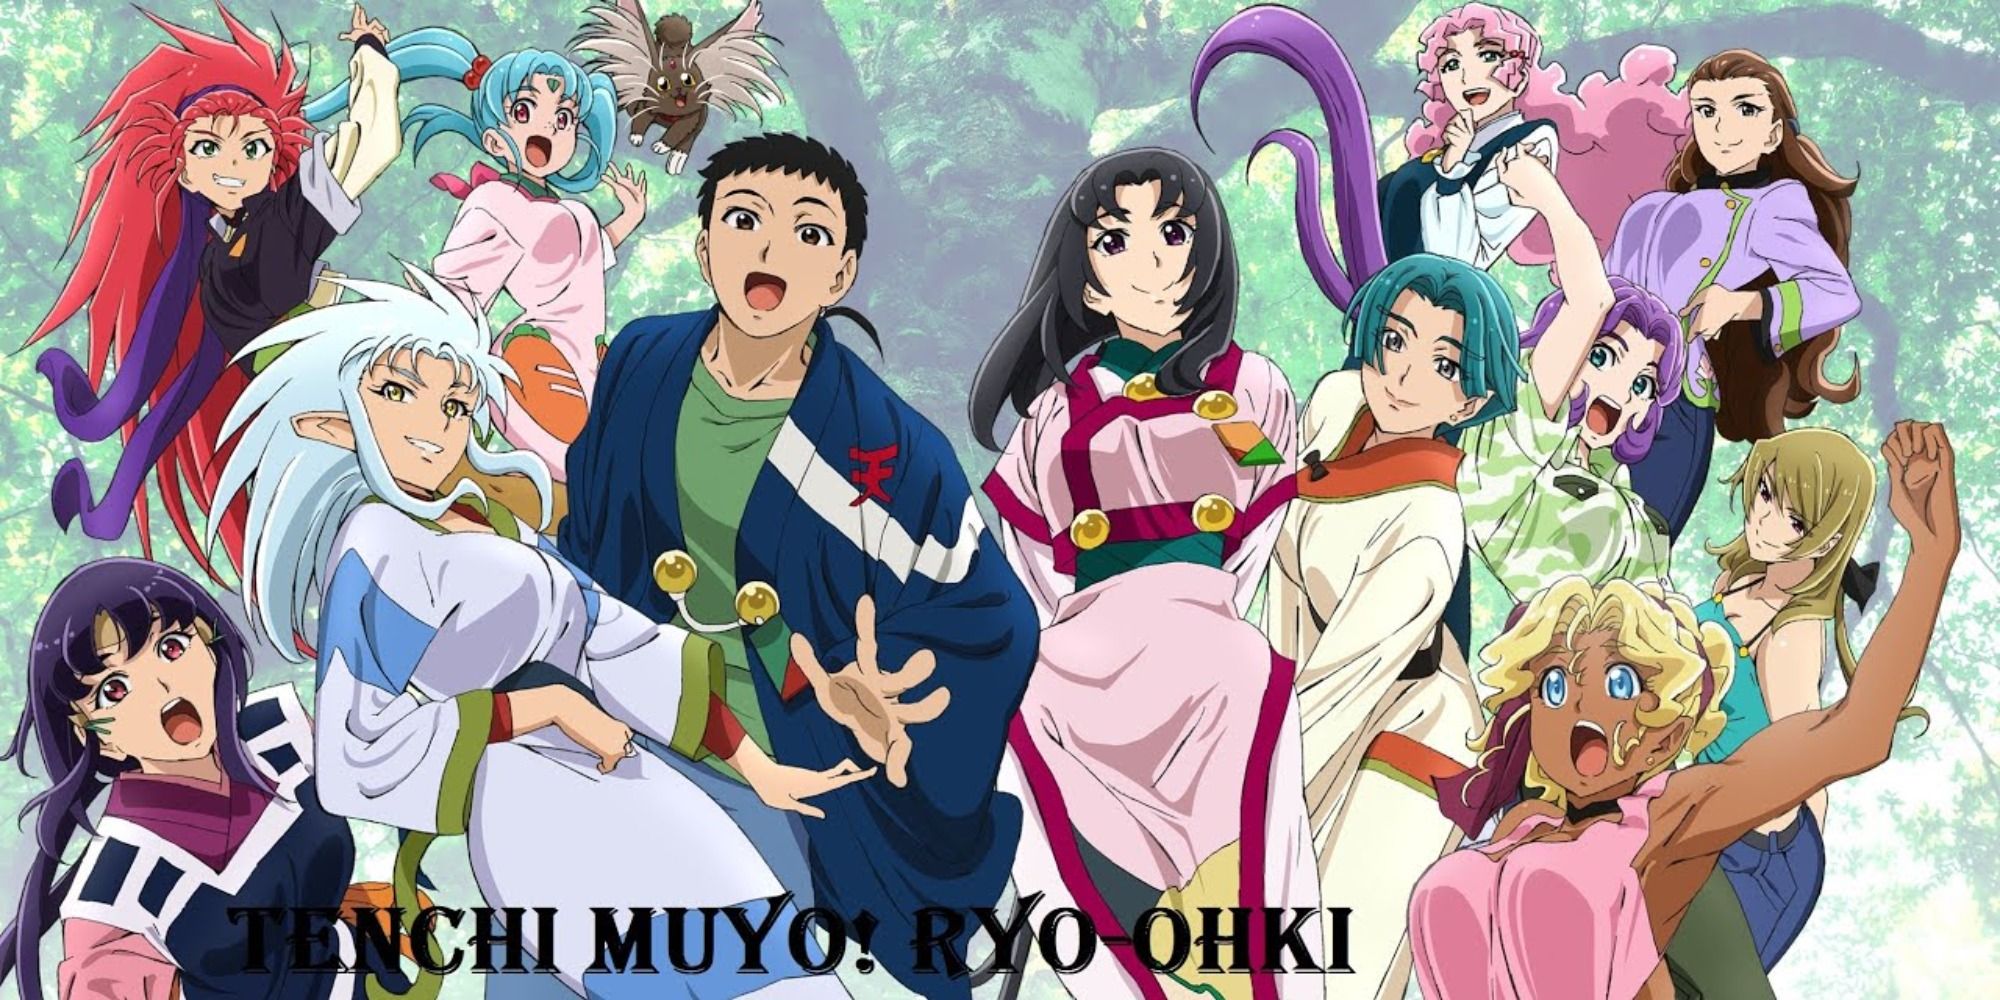 The cast of Tenchi Muyo in promotional art.